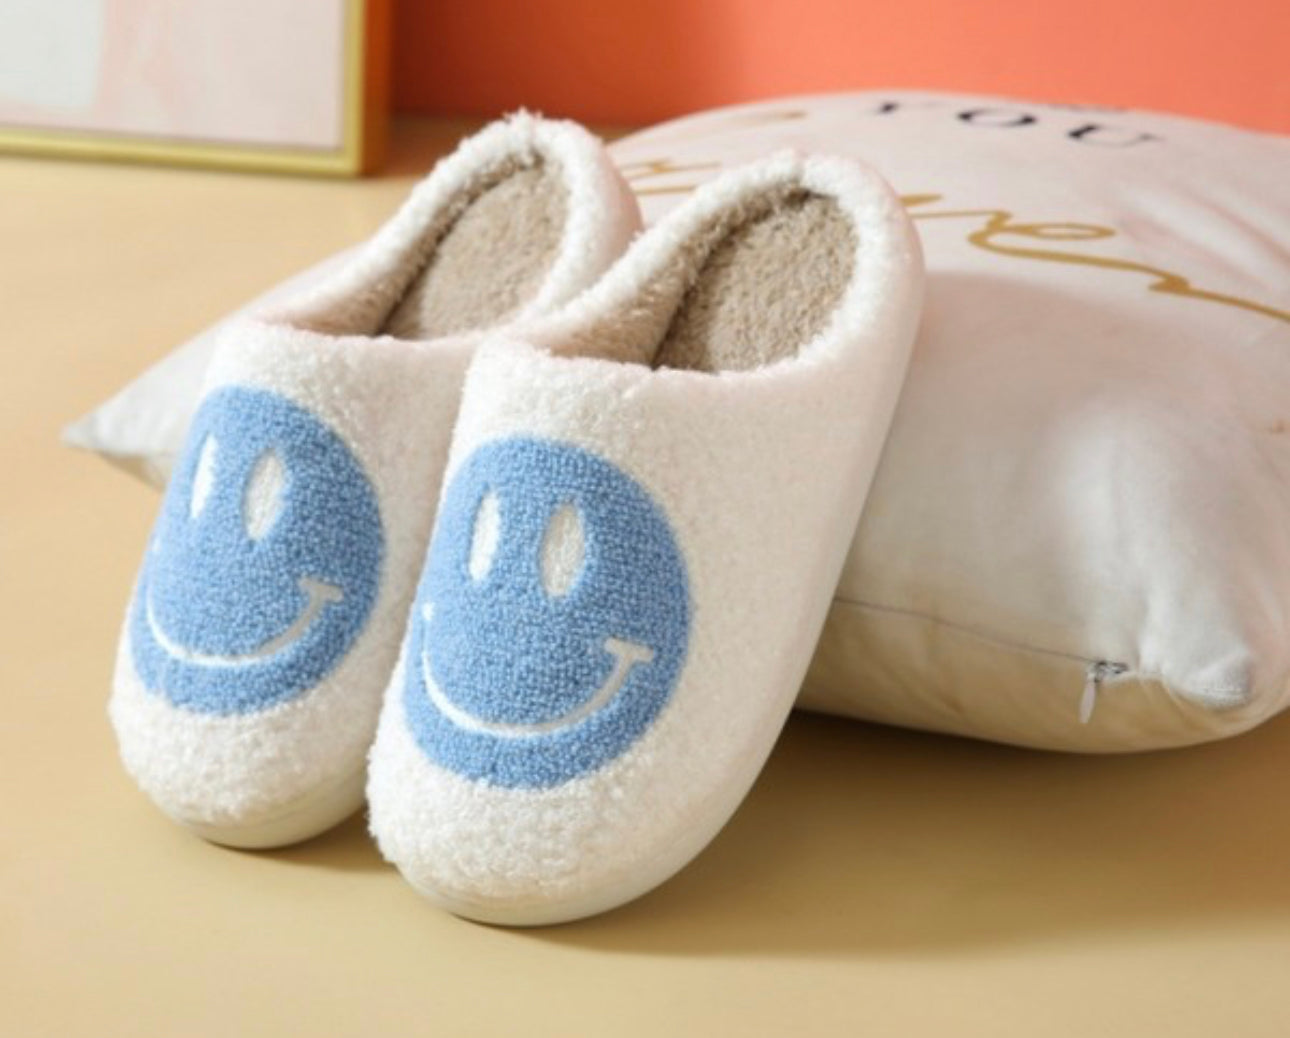 Introducing the Smiley Face Slippers A Fun and Funky Footwear Option